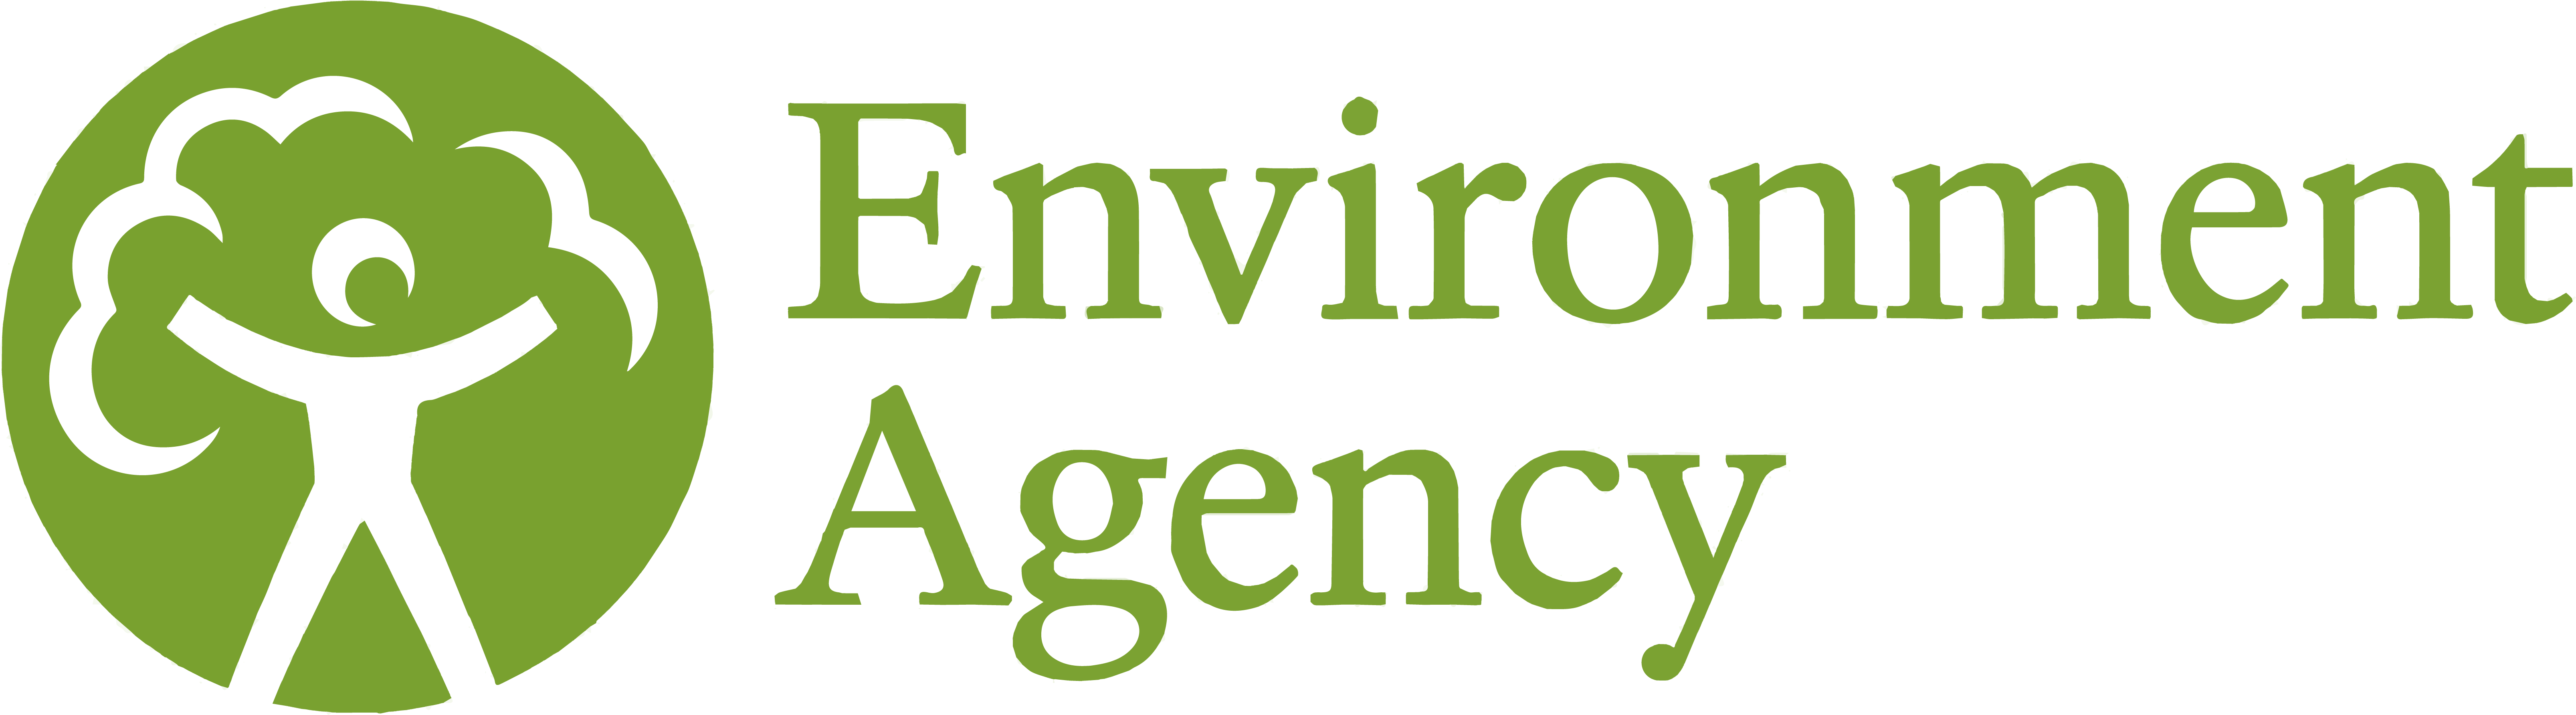 Environment Logo With A Globe Stock Photo, Picture and Royalty Free Image.  Image 67647156.